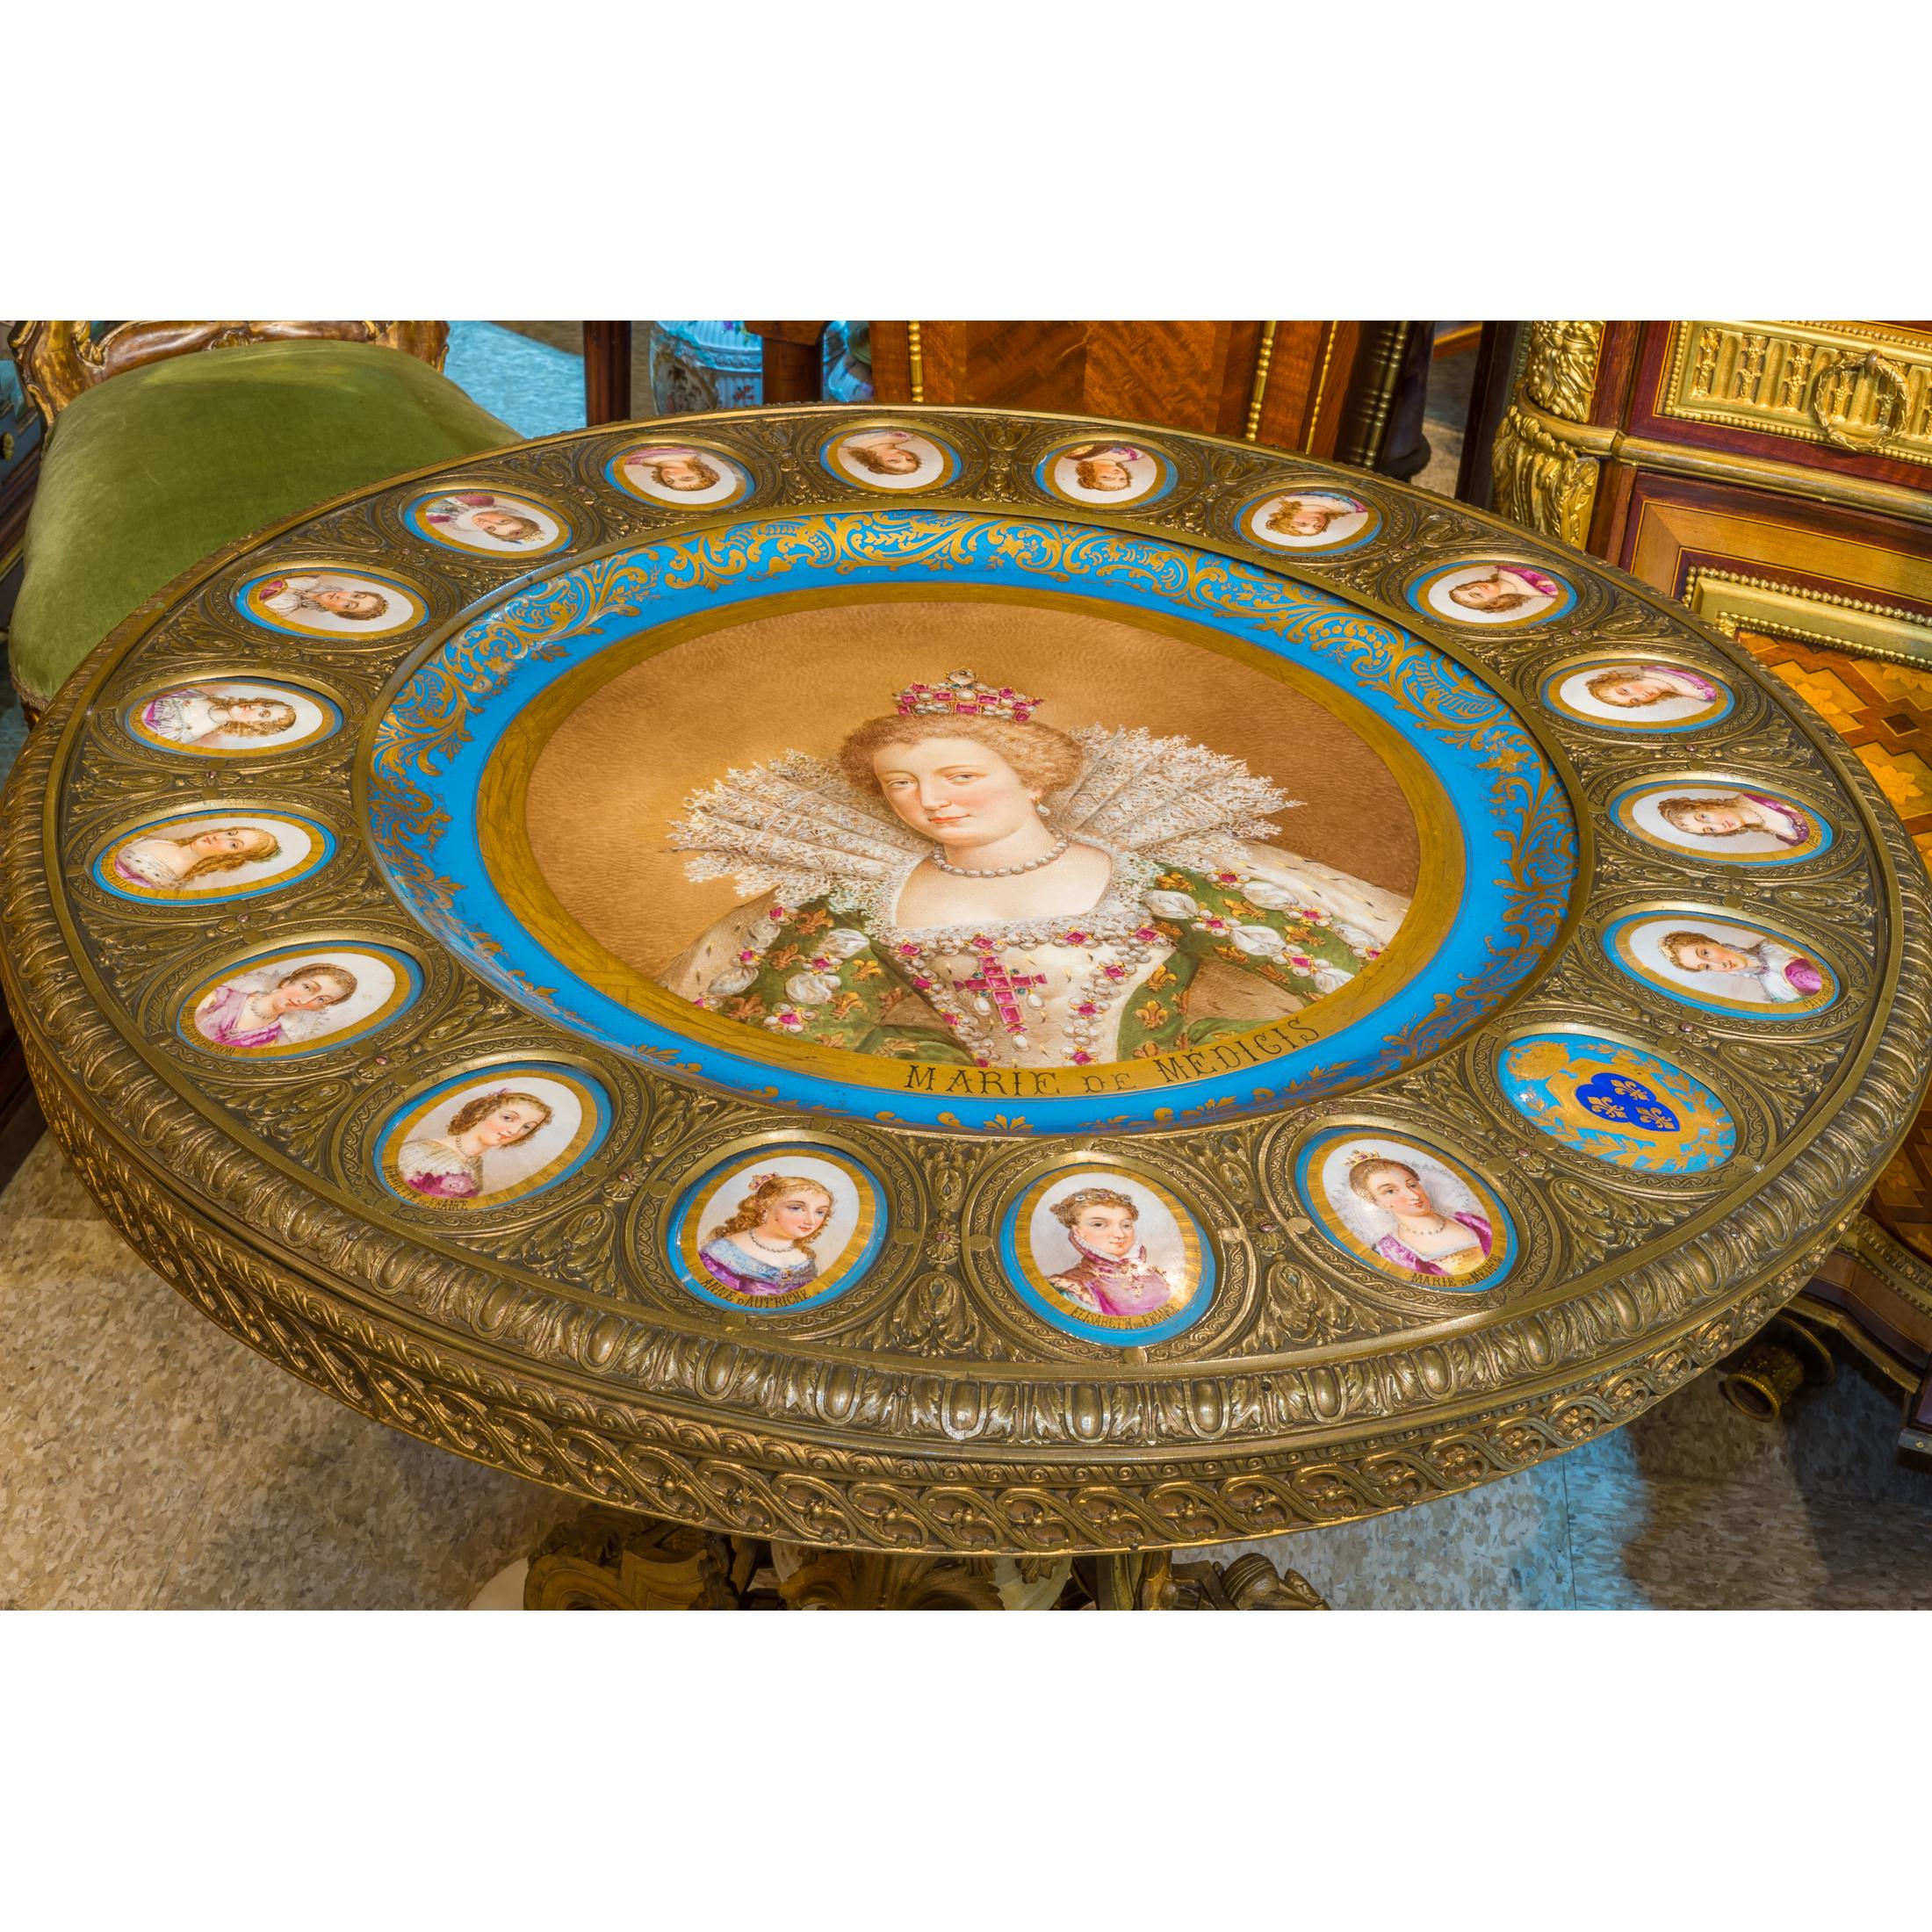 Napoleon III Ormolu-Mounted Onyx Center Table with Sèvres-style Porcelain Plaque In Good Condition For Sale In New York, NY